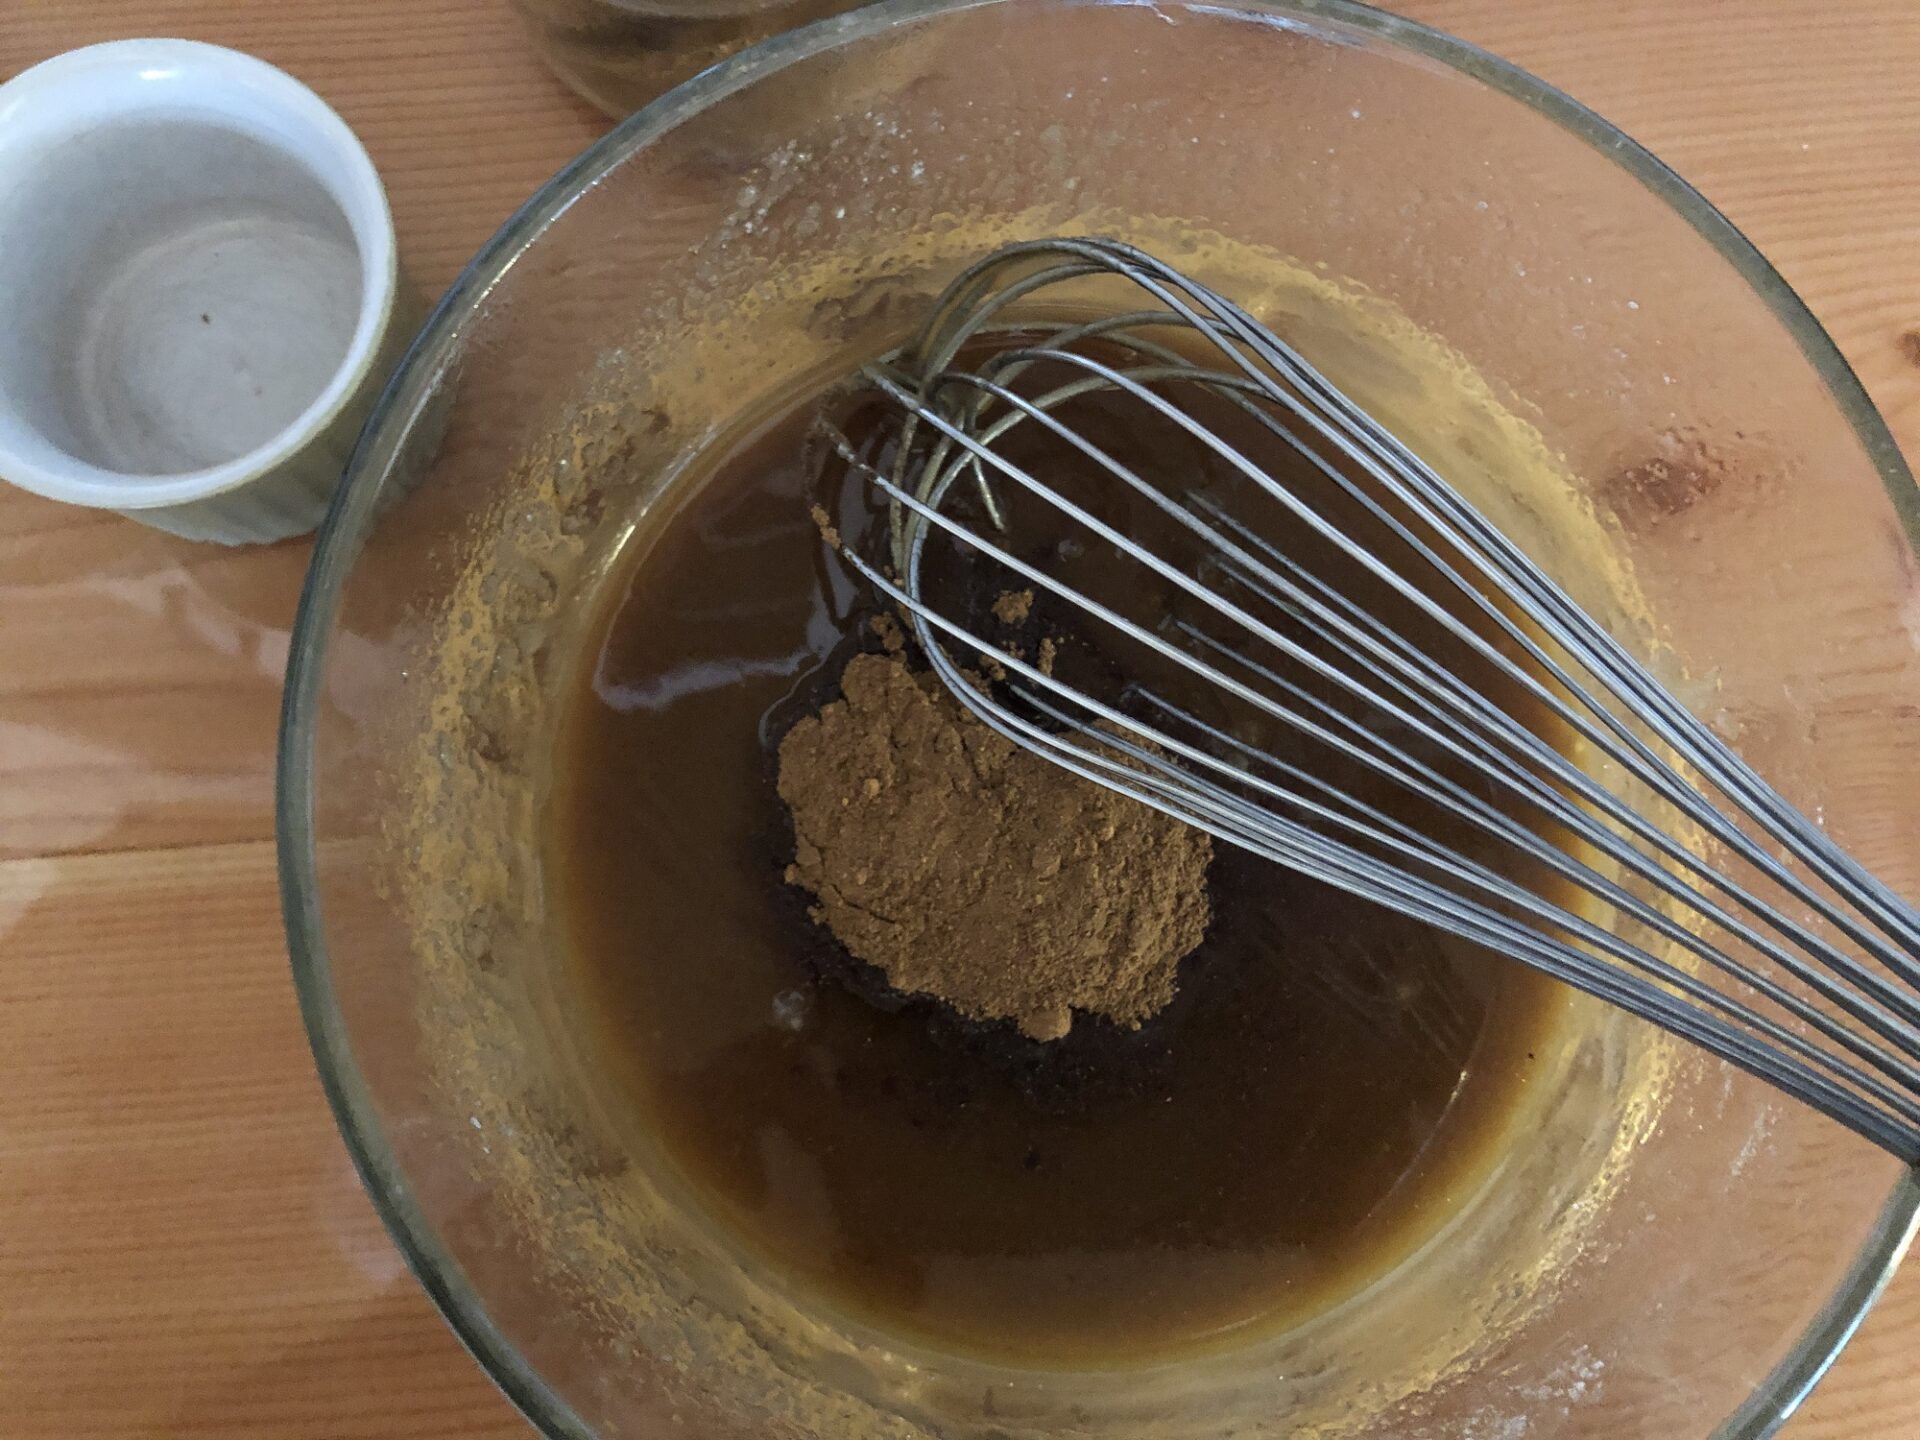 Whisking spices into melted butter and brown sugar.